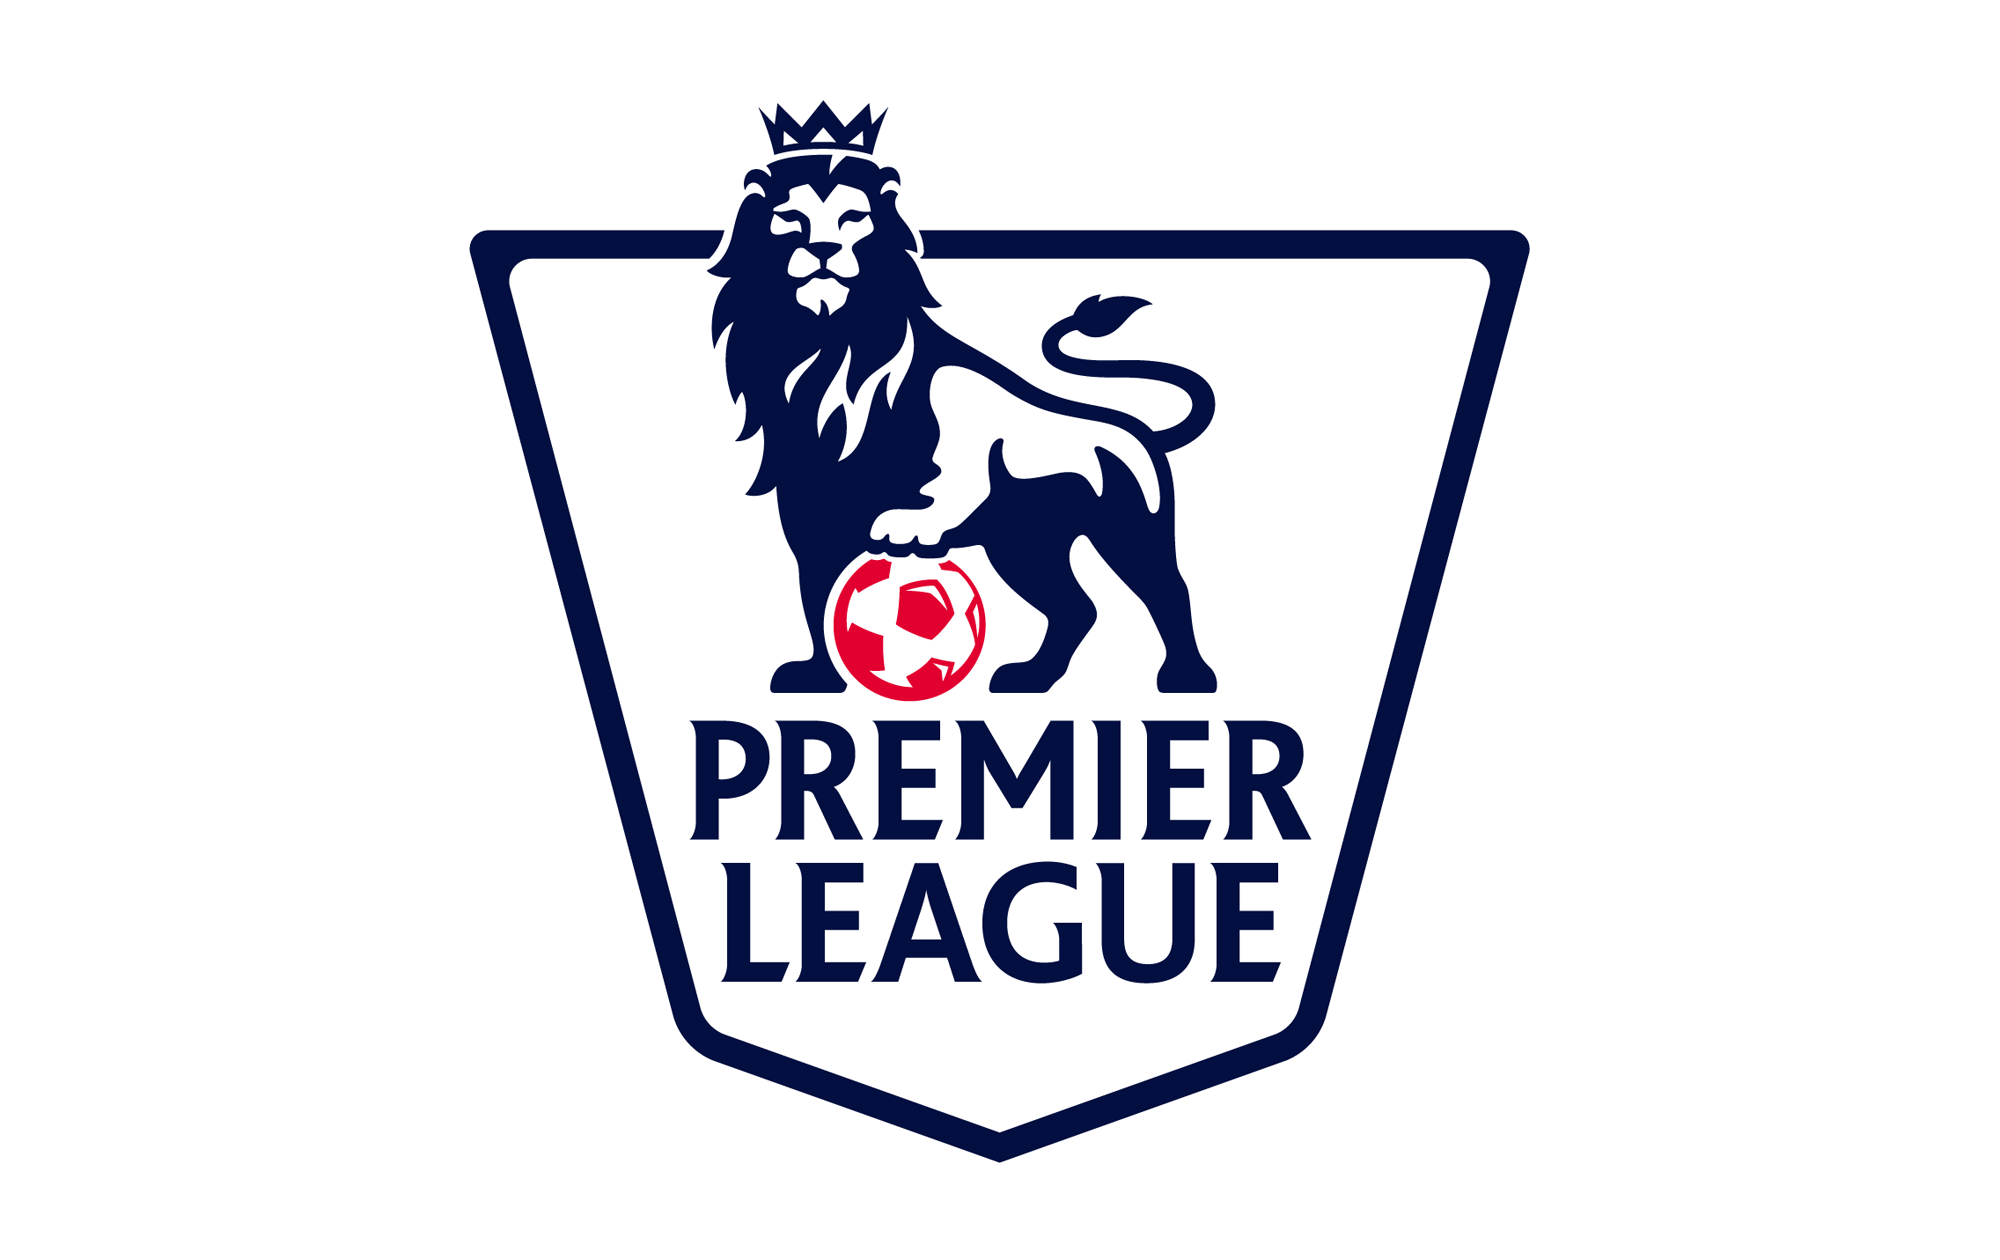 League Logo - Premier League Logo, Premier League Symbol, Meaning, History